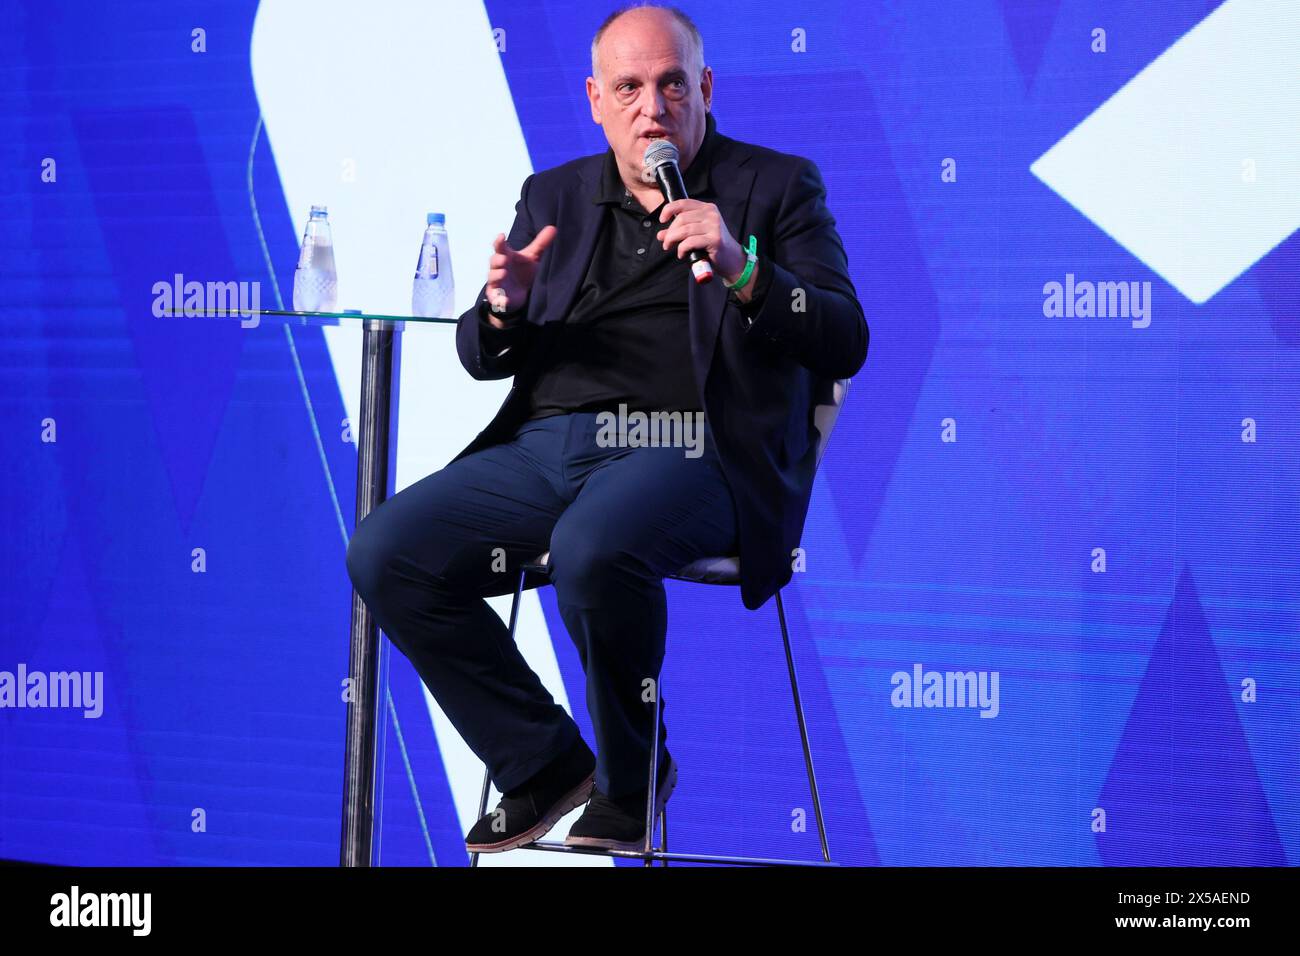 Sao Paulo, Sao Paulo, Brasil. 8th May, 2024. Sao Paulo (SP), 05/08/2024 Ã¢â‚¬' EVENT/SPORTS/SUMMIT/SP Ã¢â‚¬' Javier Tebas, president of La Liga, participates in a panel at the Sports Summit Sao Paulo 2024 - Panel Ã¢â‚¬Å“La Liga: building a global brandÃ¢â‚¬Â, with participation of Javier Tebas, president of La Liga, moderated by Bruno Rodrigues, journalist from CNN Brasil, in the 2nd edition of Sports Summit Sao Paulo 2024, a meeting point for the sports industry. The event takes place between May 7th and 9th, at the Hilton Morumbi Hotel, in the capital of Sao Paulo. (Credit Image: © Leco V Stock Photo